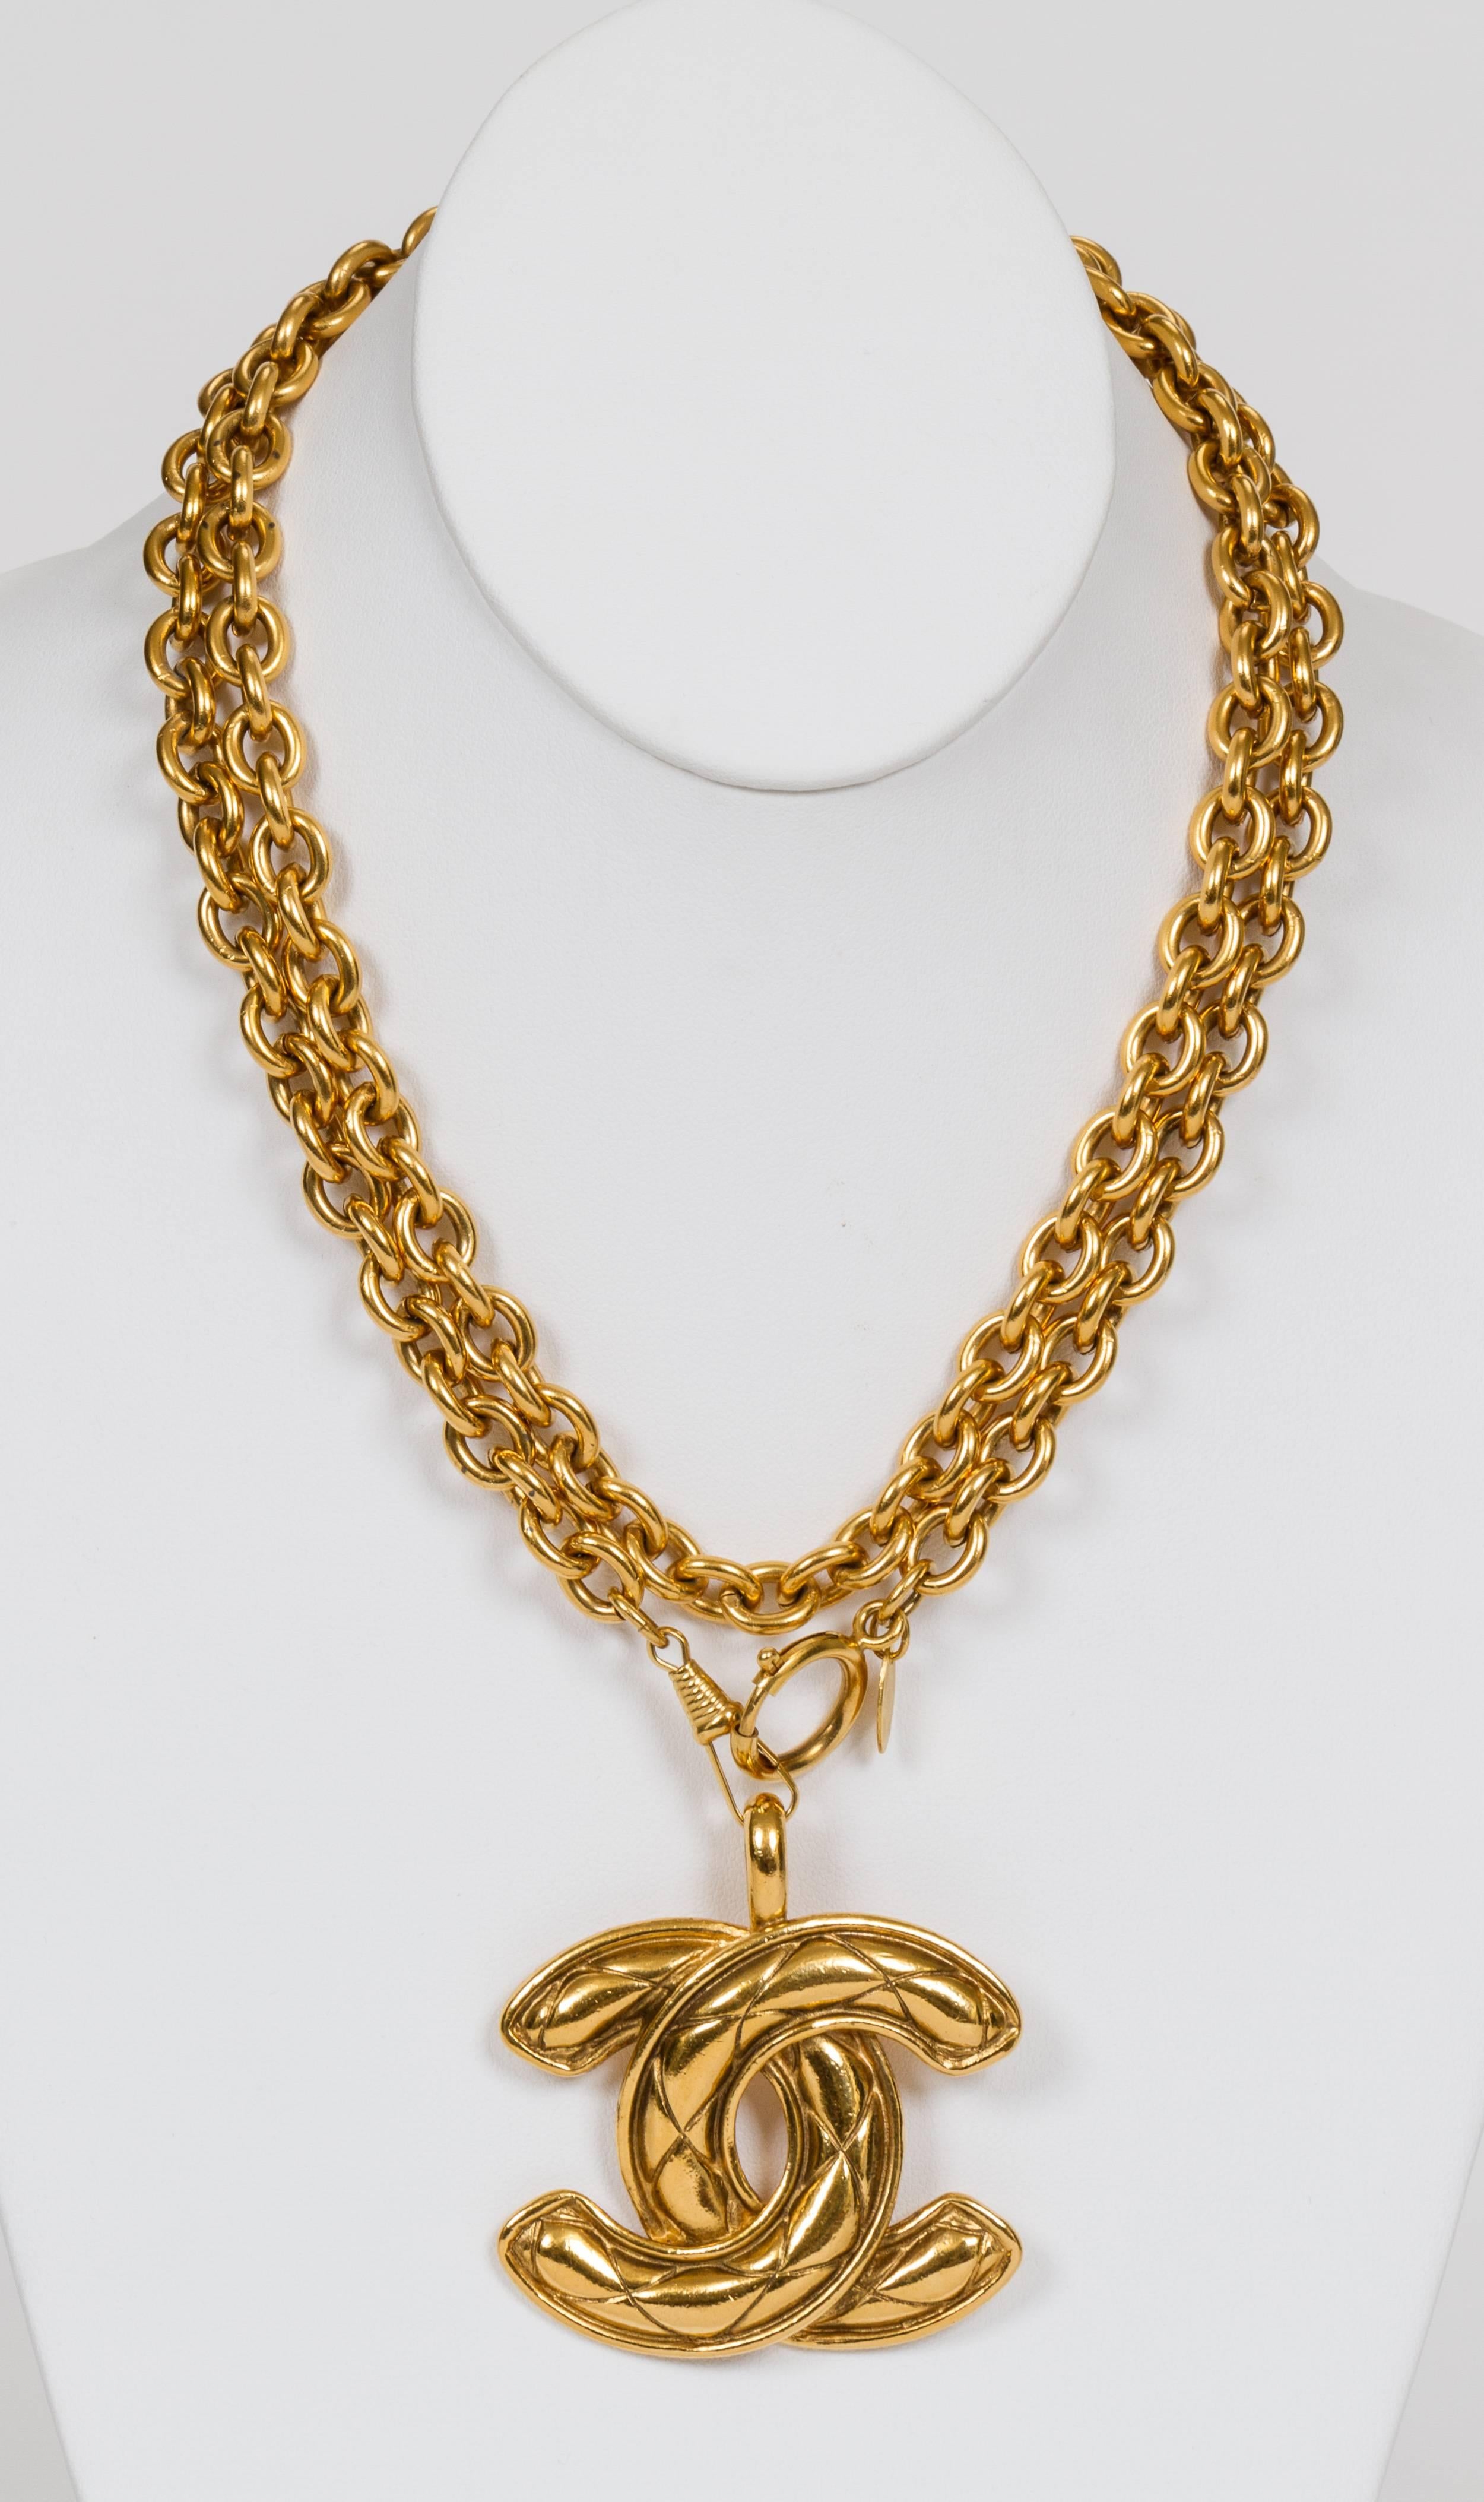 Chanel 1980s long chain necklace with CC logo quilted pendant. Comes with the original vintage Chanel box and is in great condition.